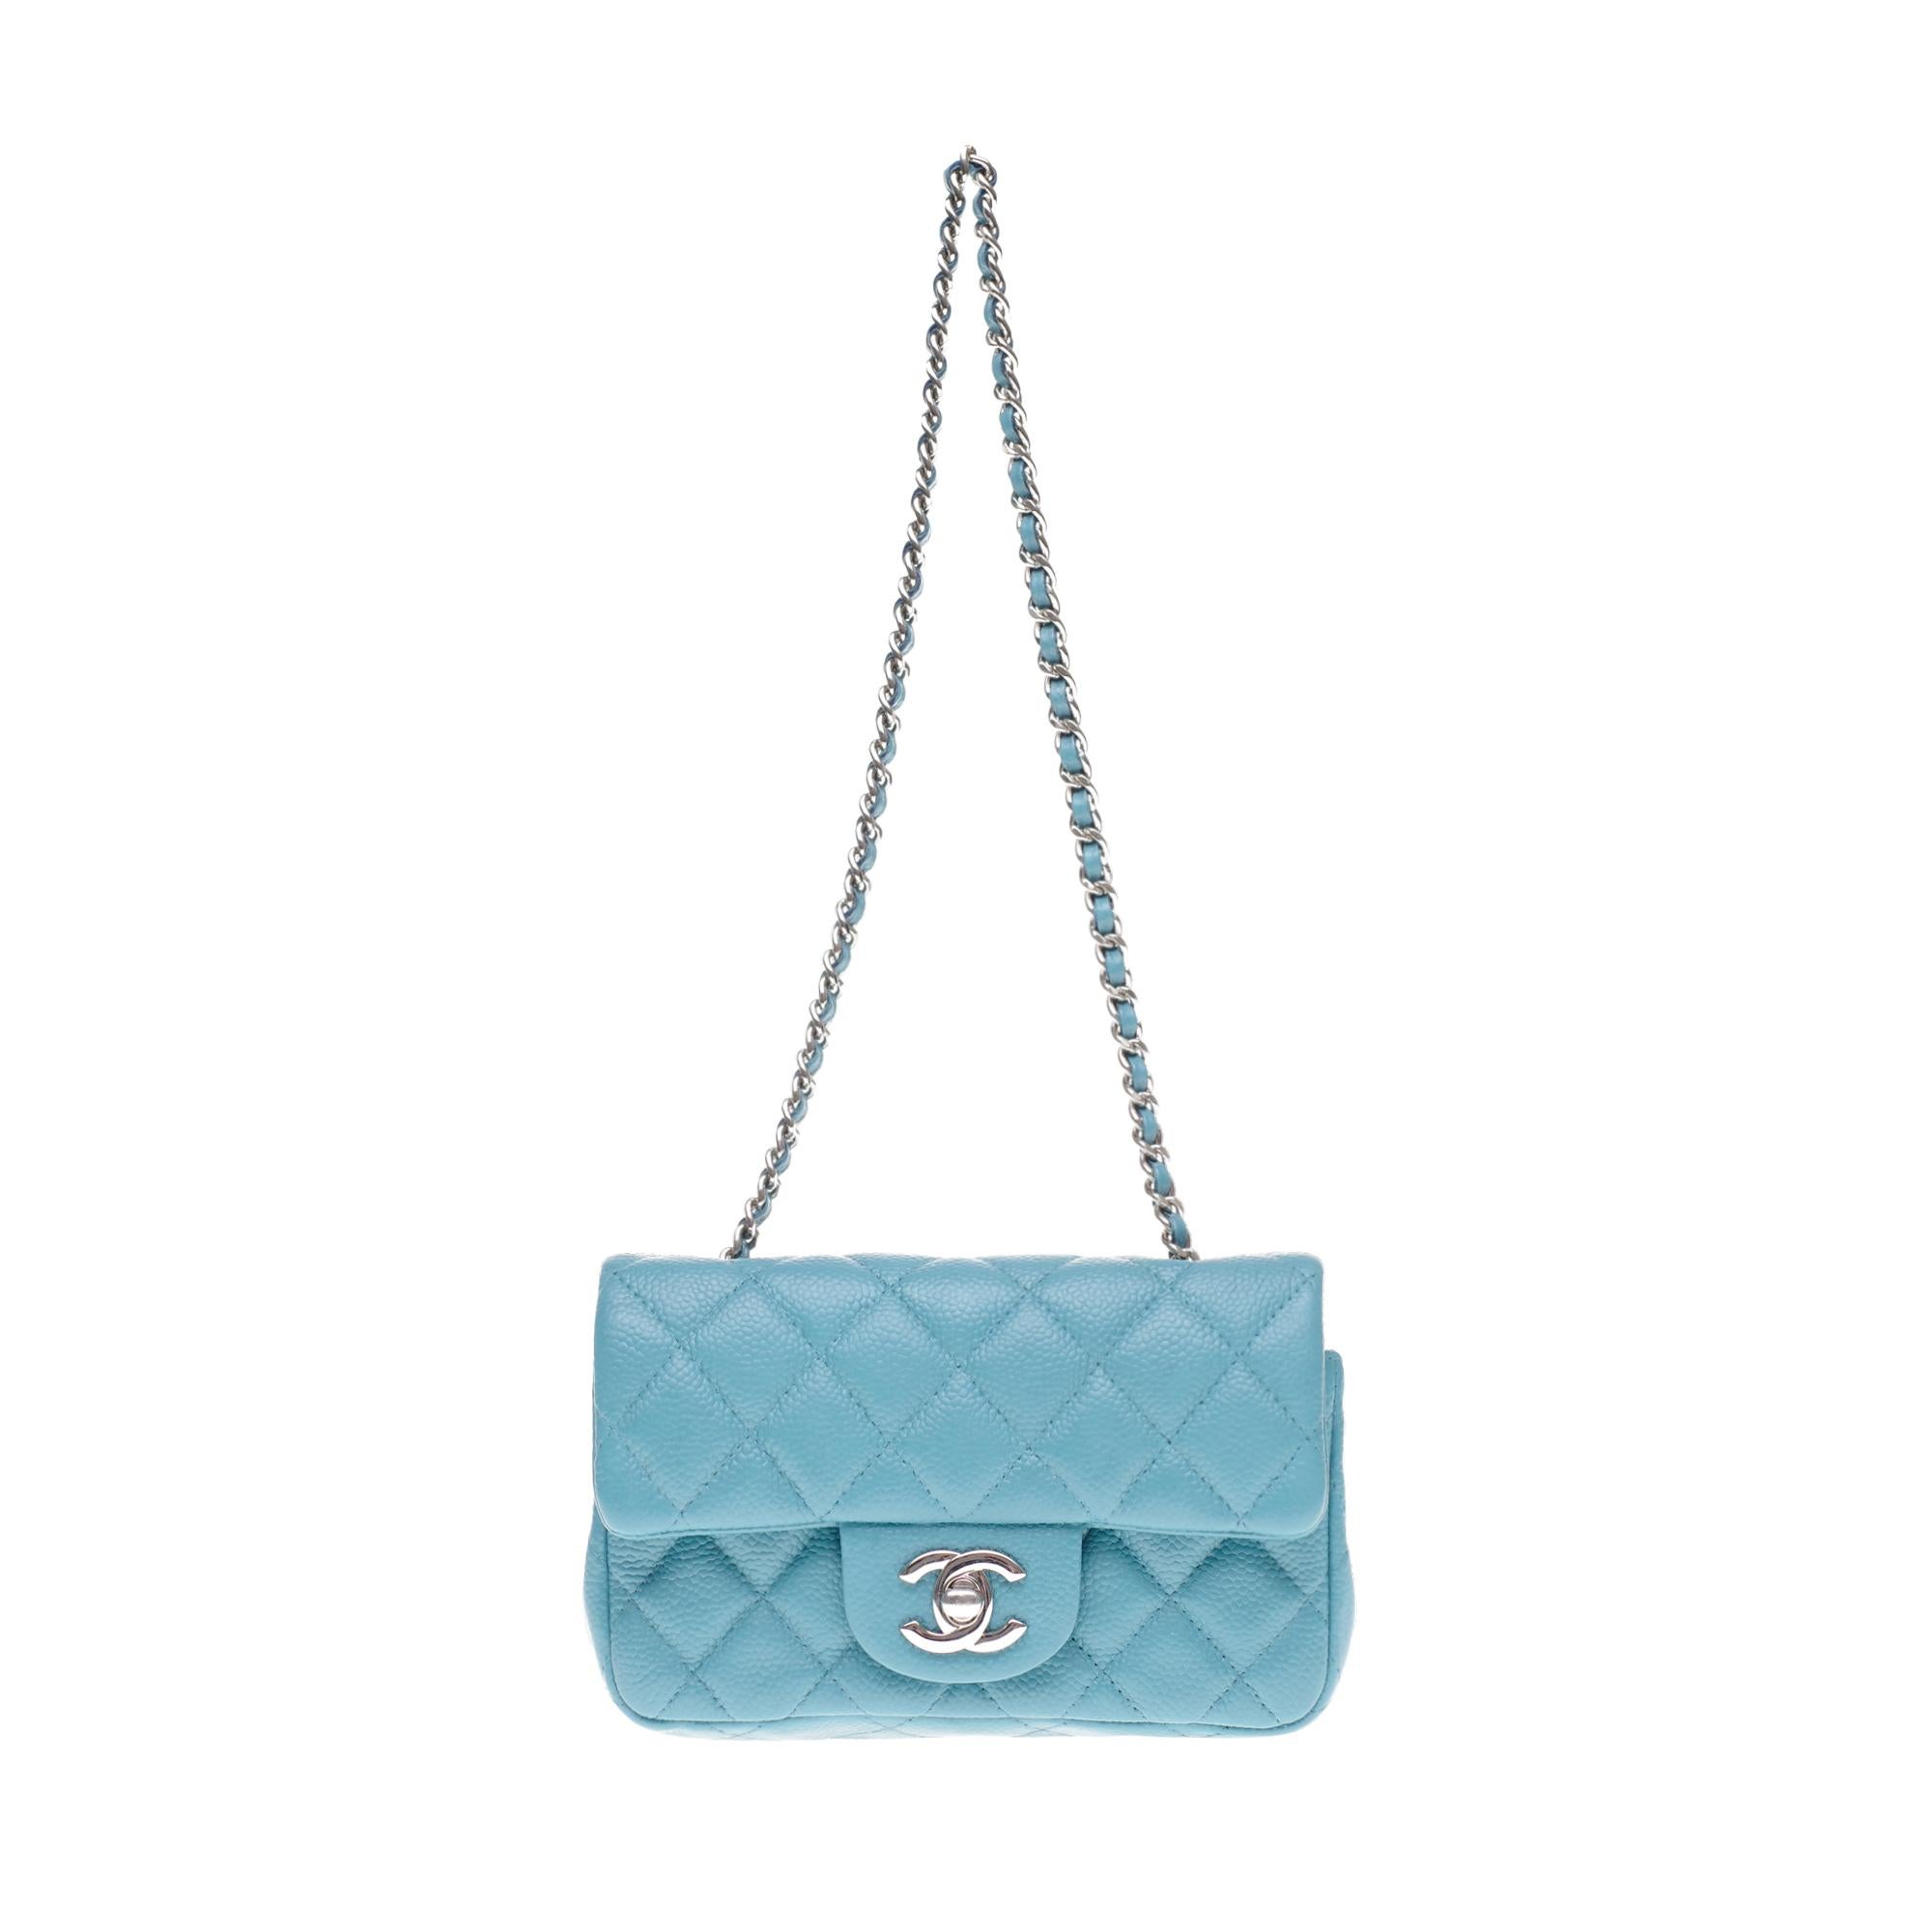 Splendid Mini Chanel handbag in turquoise blue quilted caviar leather, silver metal trim, a chain handle in turquoise leather interlaced with silver metal allowing a hand or shoulder carrying.
Closure by flap with CC logo in silver metal, turnstile